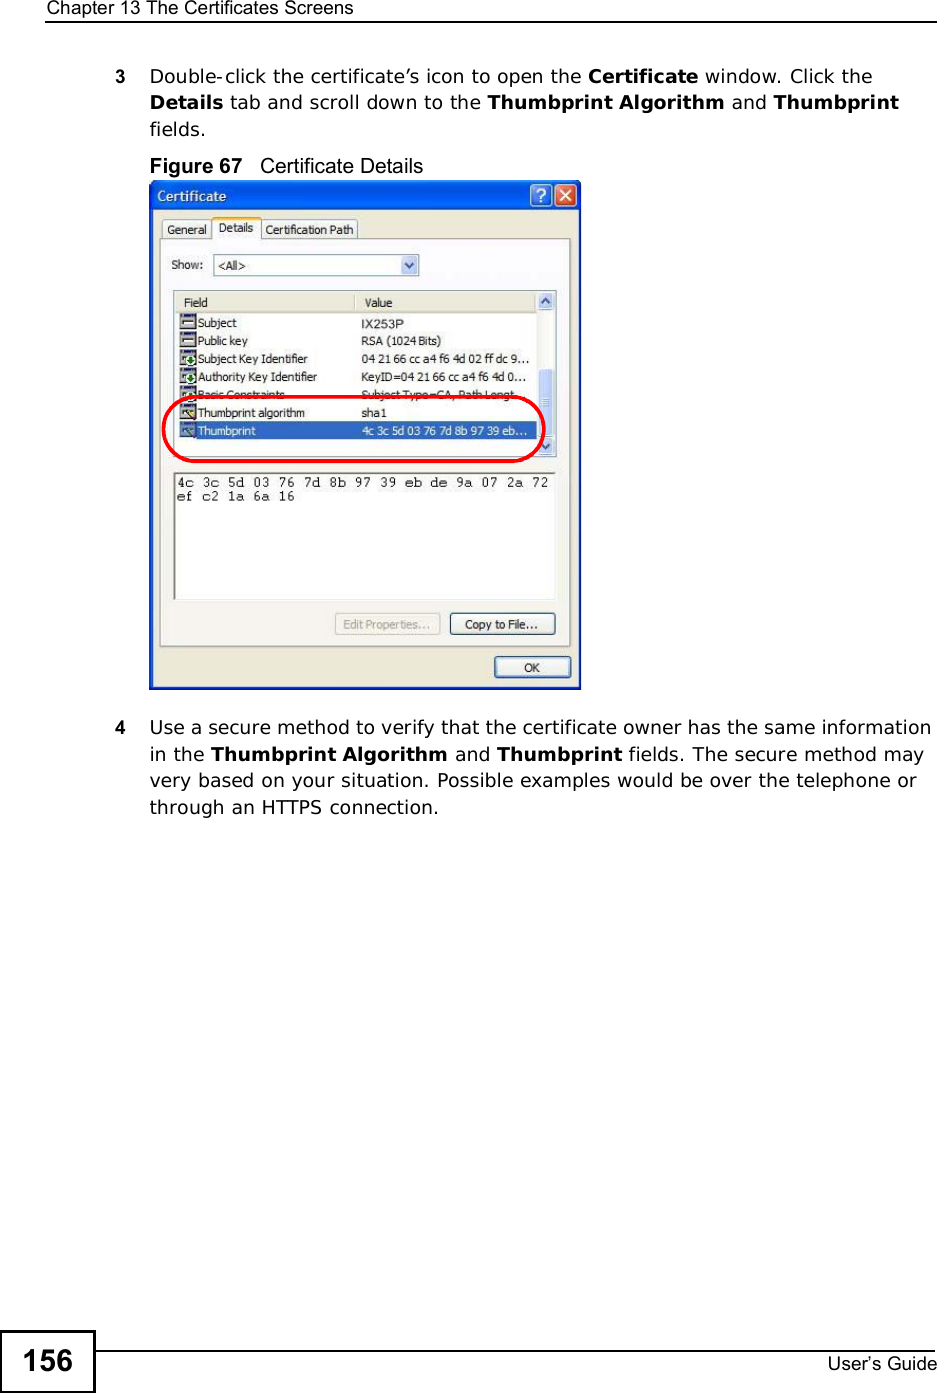 Chapter 13The Certificates ScreensUser s Guide1563Double-click the certificate’s icon to open the Certificate window. Click the Details tab and scroll down to the Thumbprint Algorithm and Thumbprintfields.Figure 67   Certificate Details 4Use a secure method to verify that the certificate owner has the same information in the Thumbprint Algorithm and Thumbprint fields. The secure method may very based on your situation. Possible examples would be over the telephone or through an HTTPS connection. 